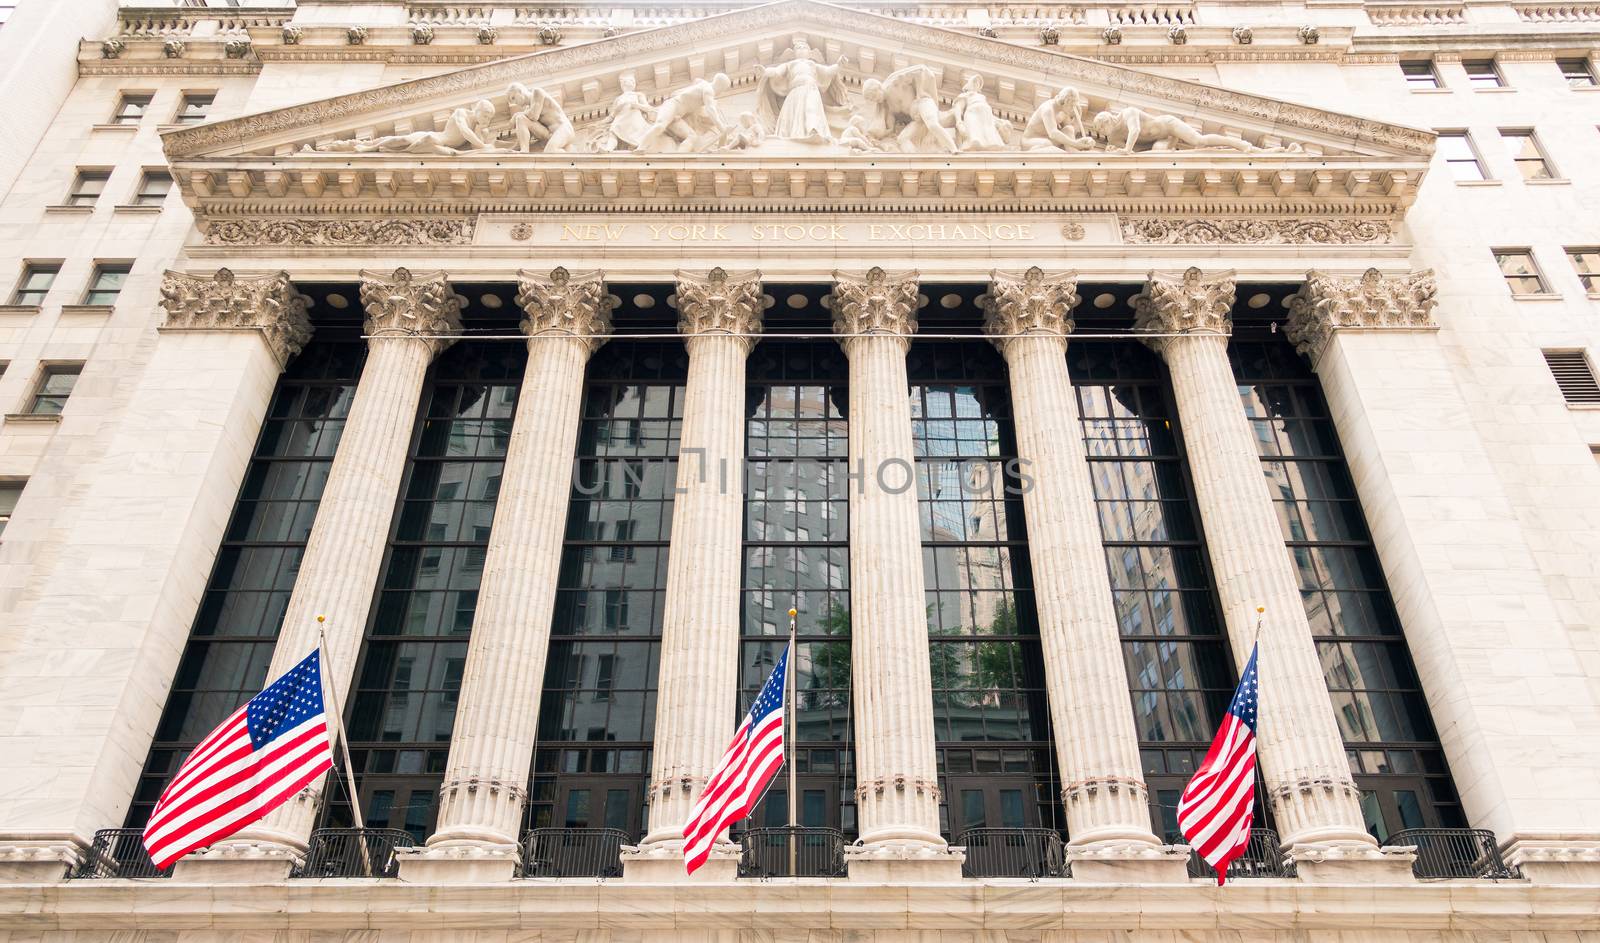 NEW YORK CITY, USA - CIRCA AUGUST 2015: The New York Stock Exchange on Wall Street is the largest stock exchange in the world.